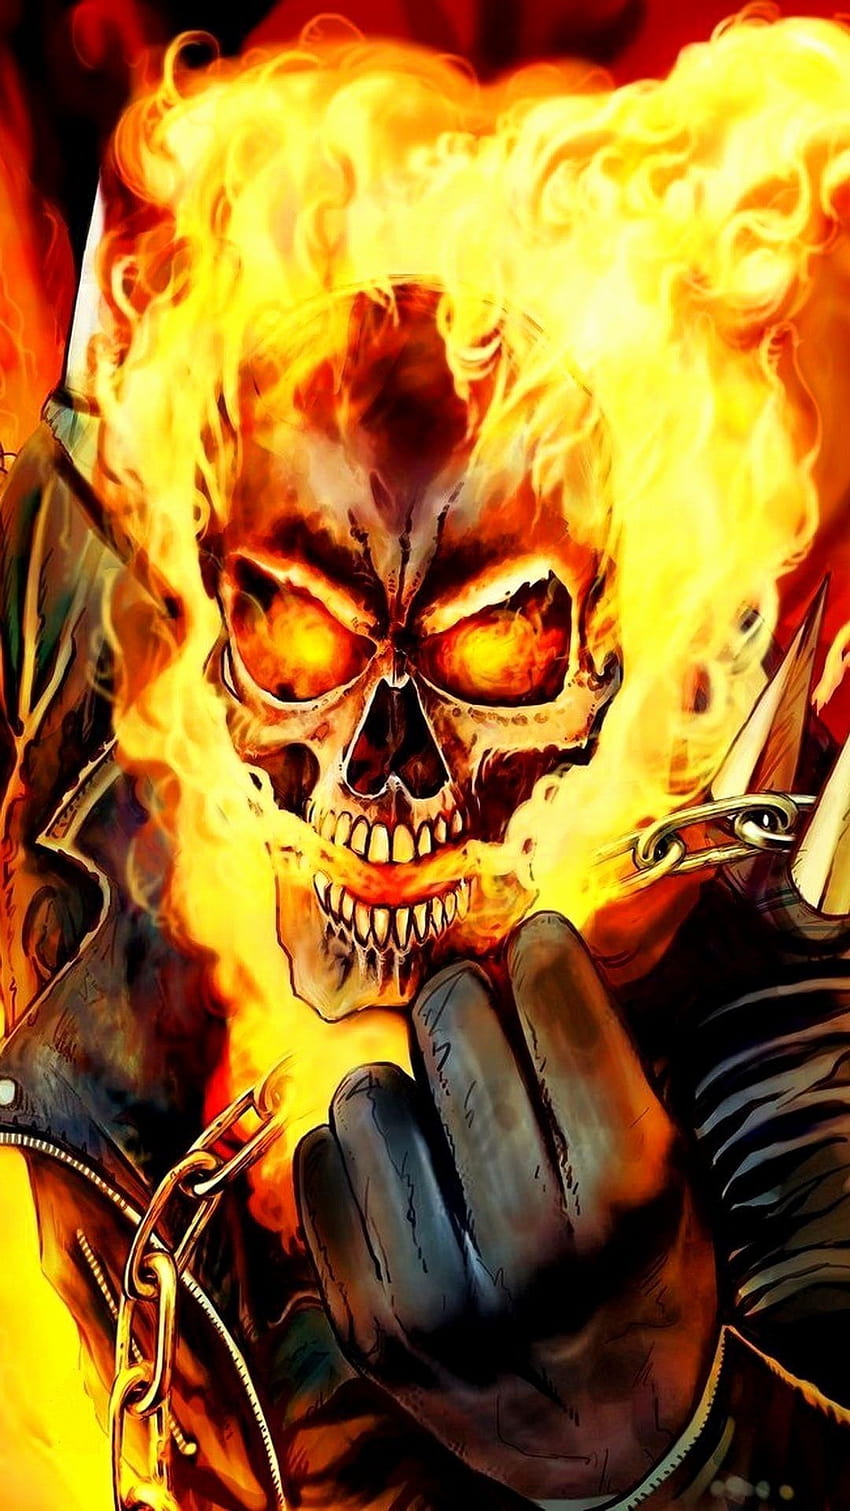 Ghost Best Of Ghost Rider 2017 Cave Of the Day, danger ghost HD phone wallpaper